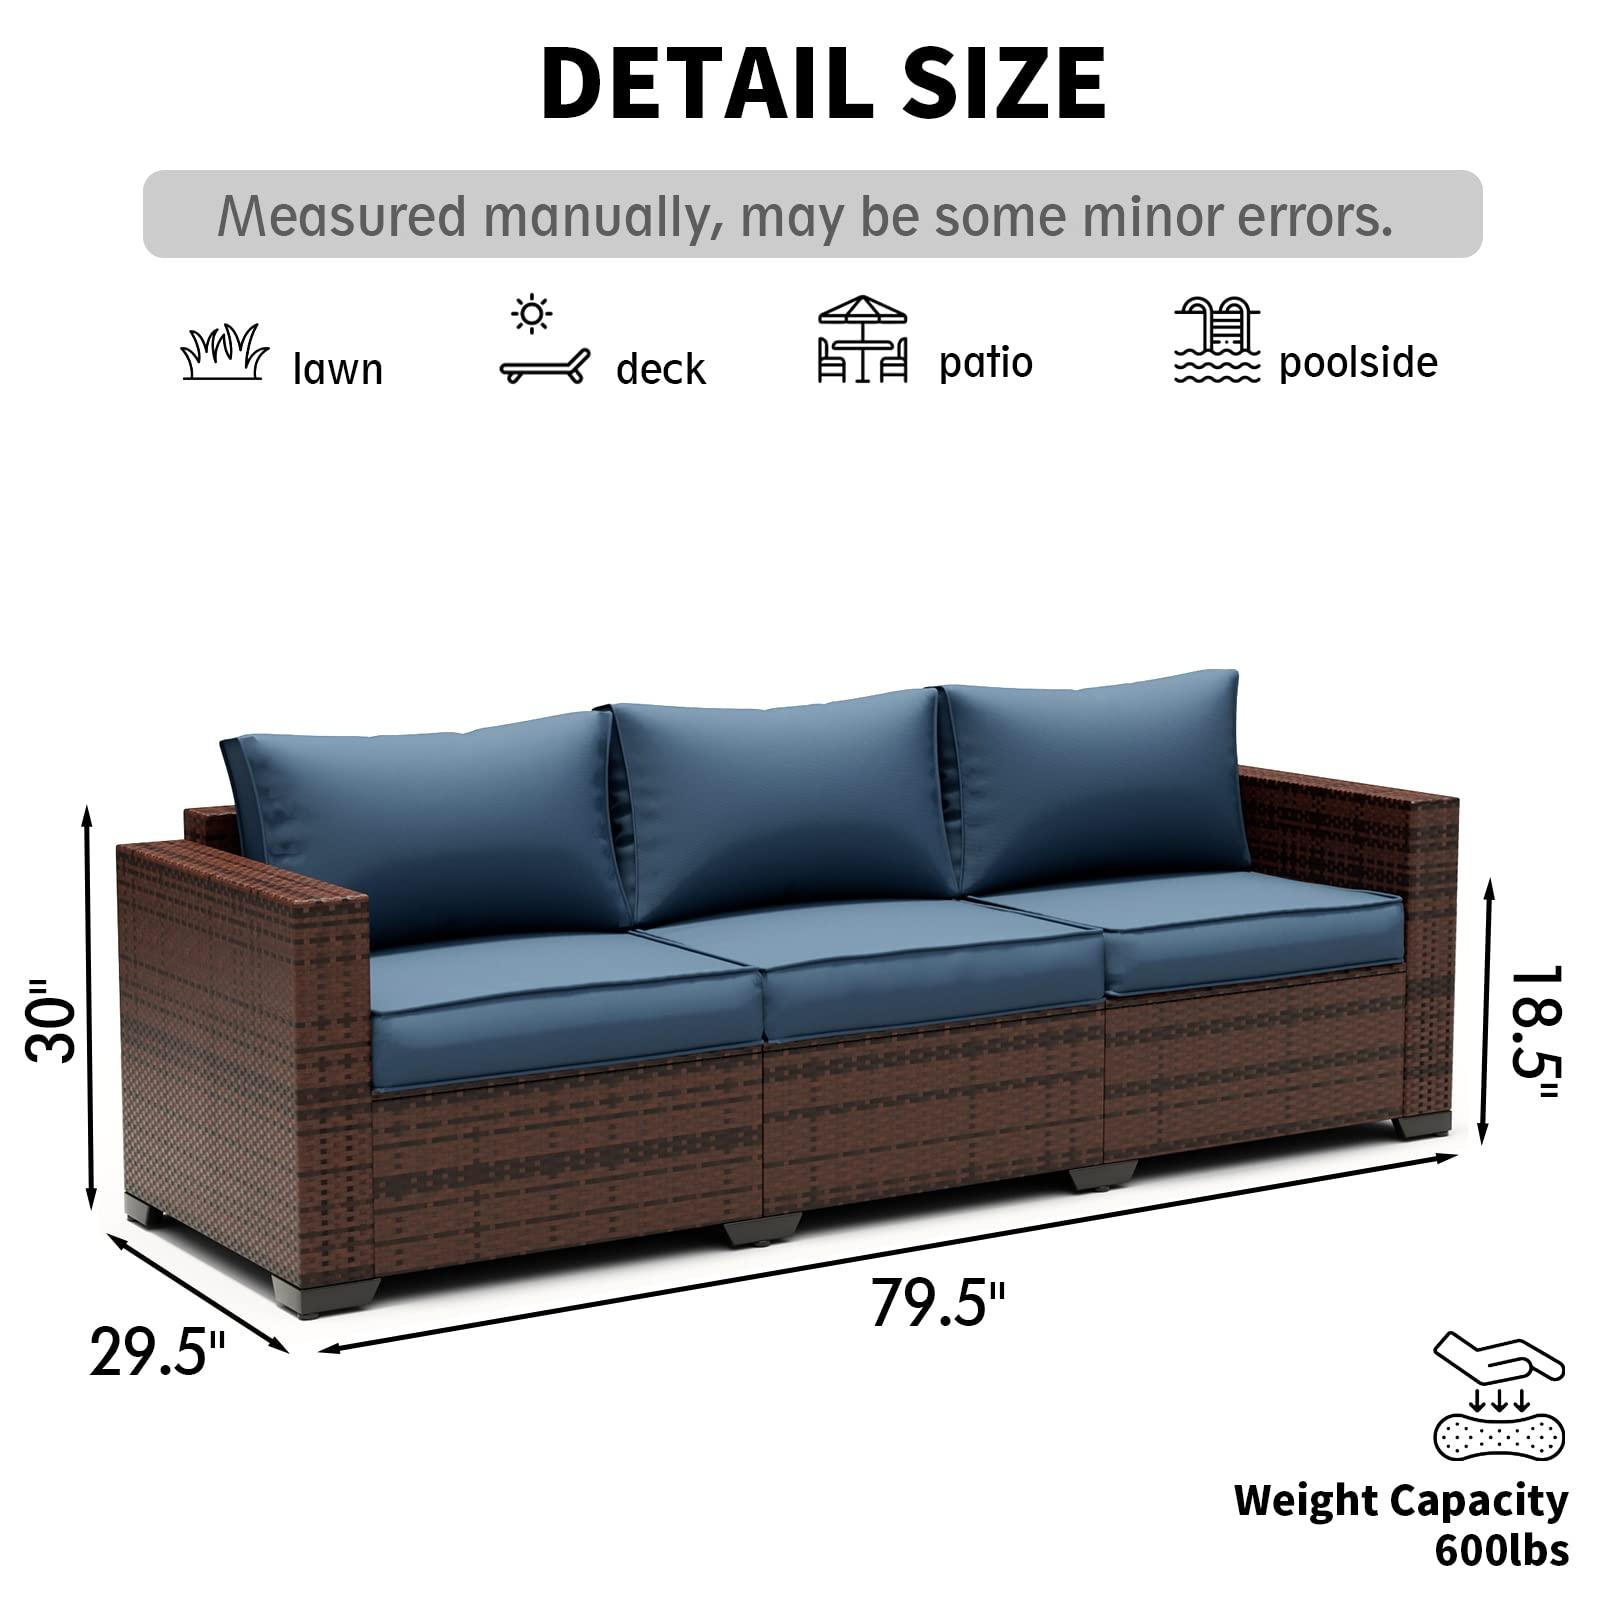 UDPATIO 3-Seat Patio Wicker Sofa, Outdoor Rattan Sectional Couch Furniture Steel Frame w/Furniture Cover Non-Slip Cushion and Deep Seating High Back, Navy - CookCave